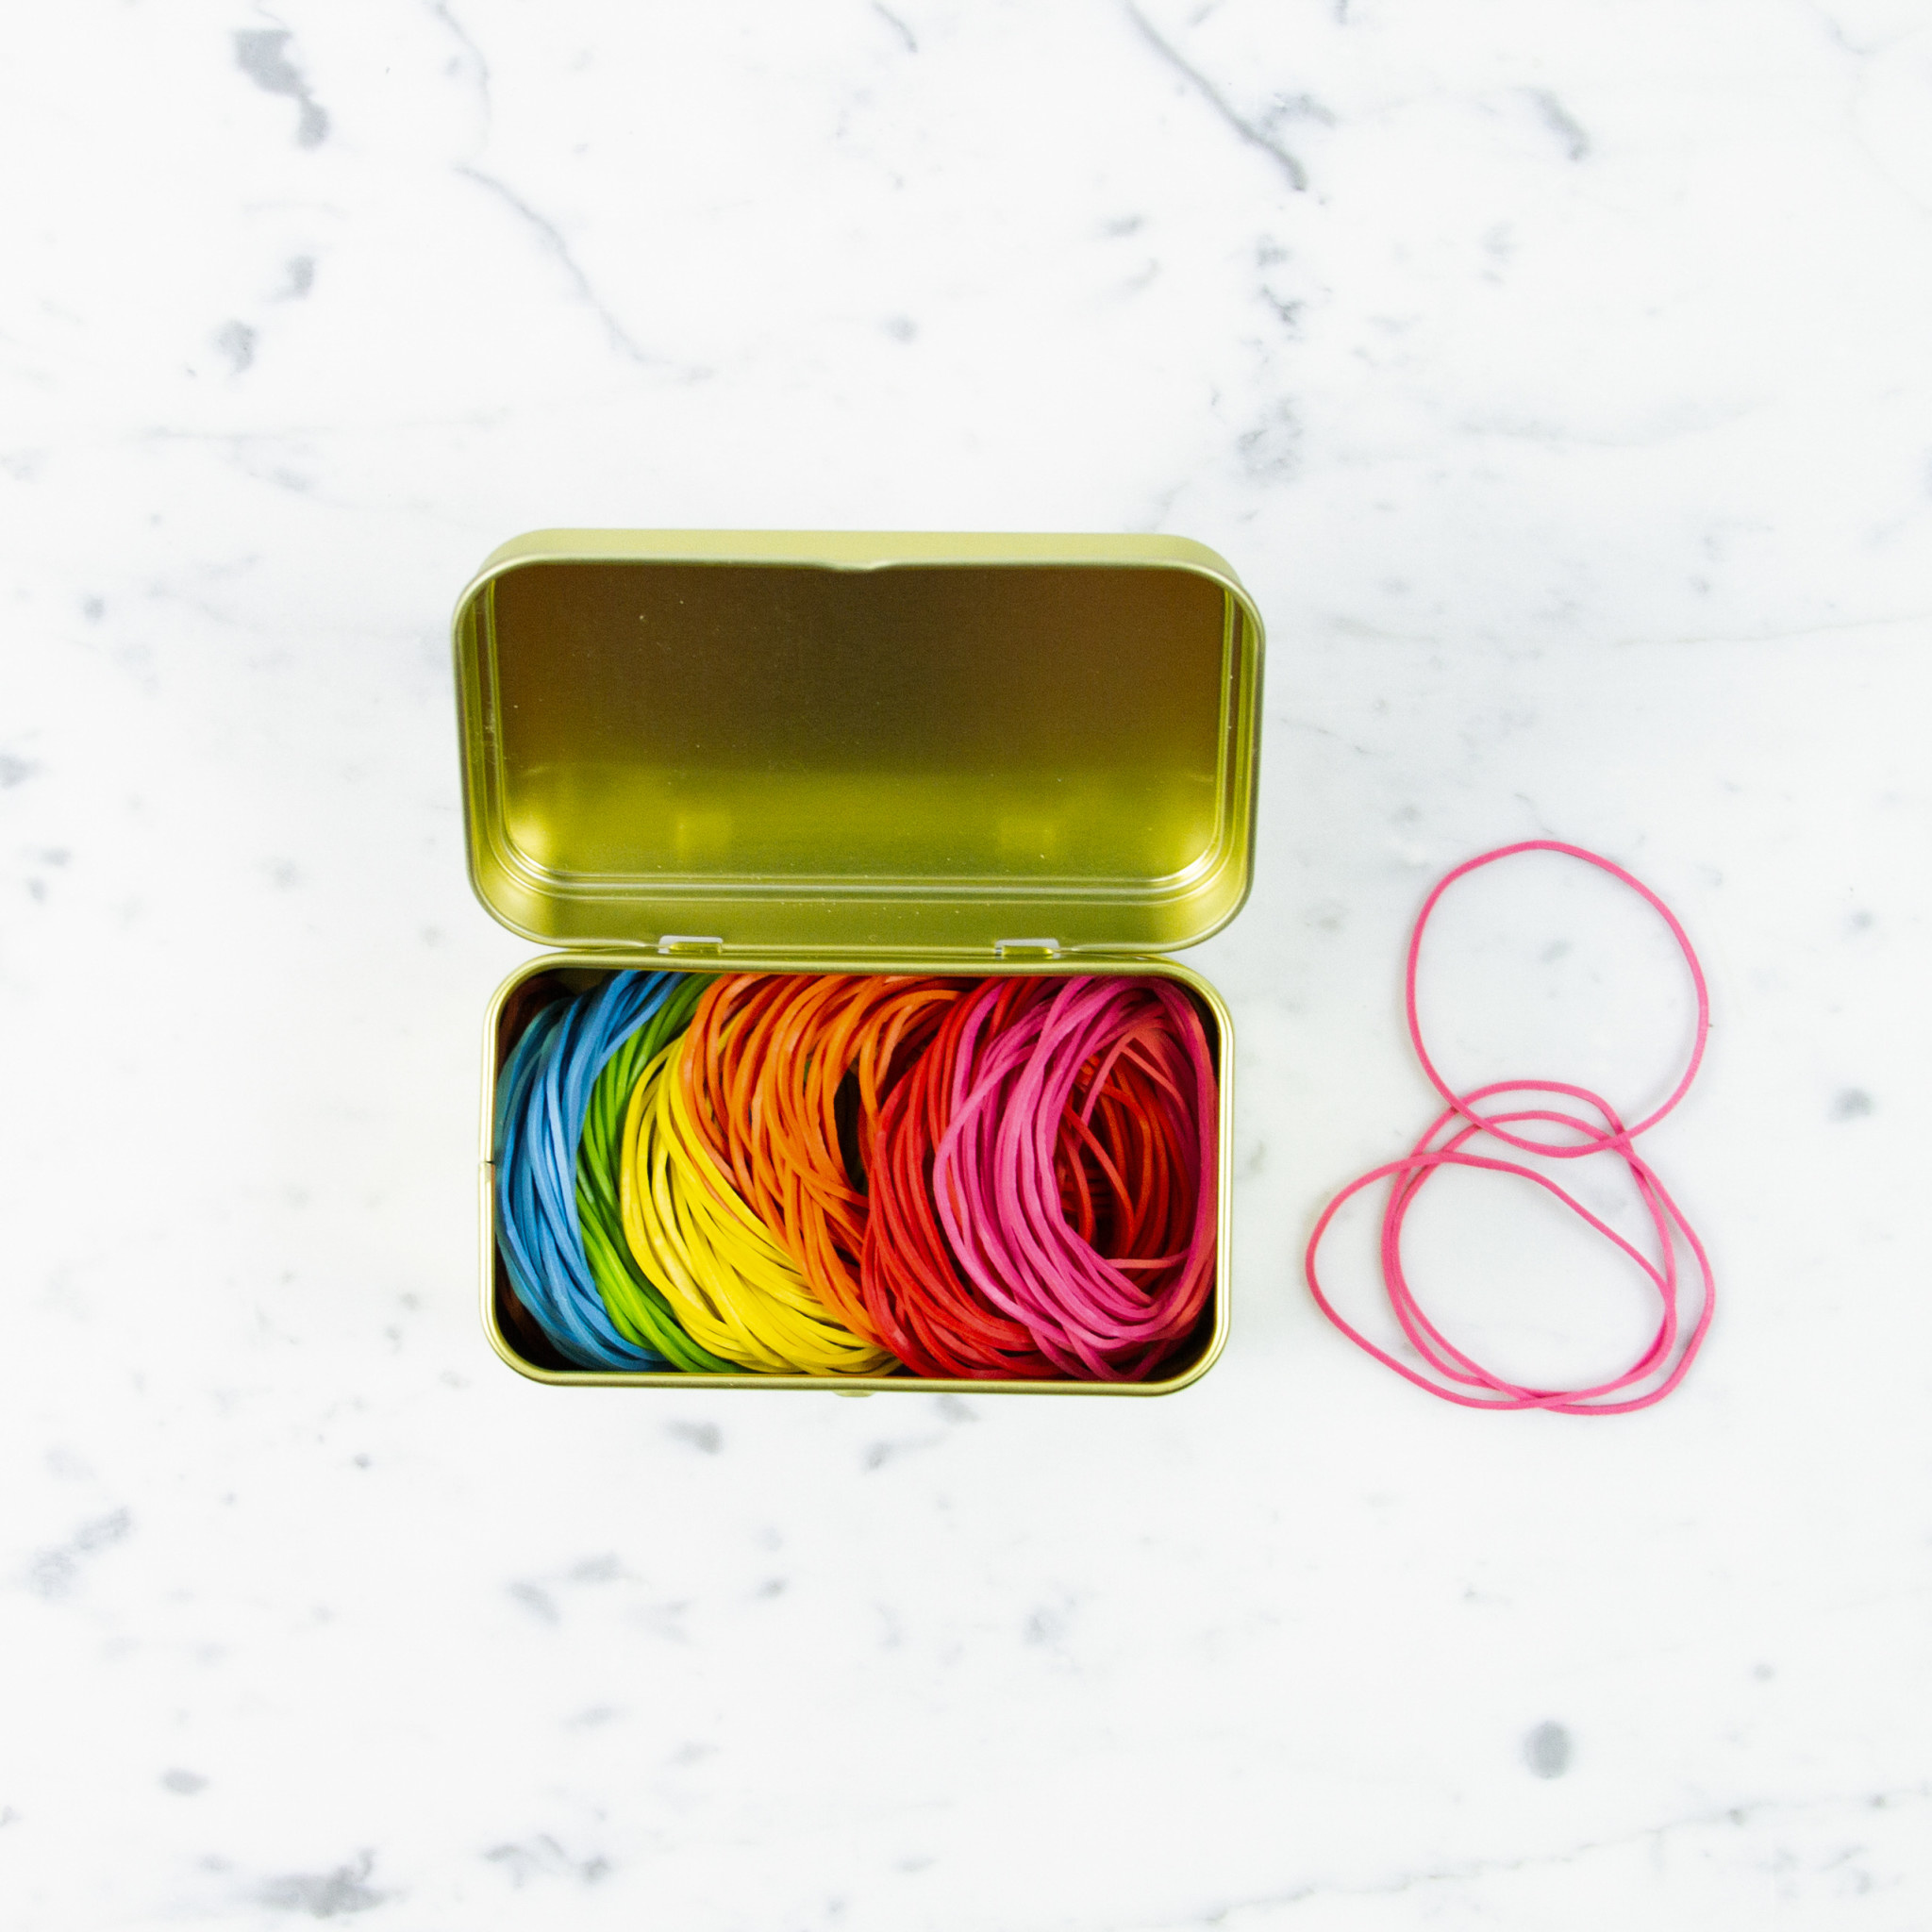 Kyowa O'Band Rubber Bands - Gold Tin with 8-color Mix